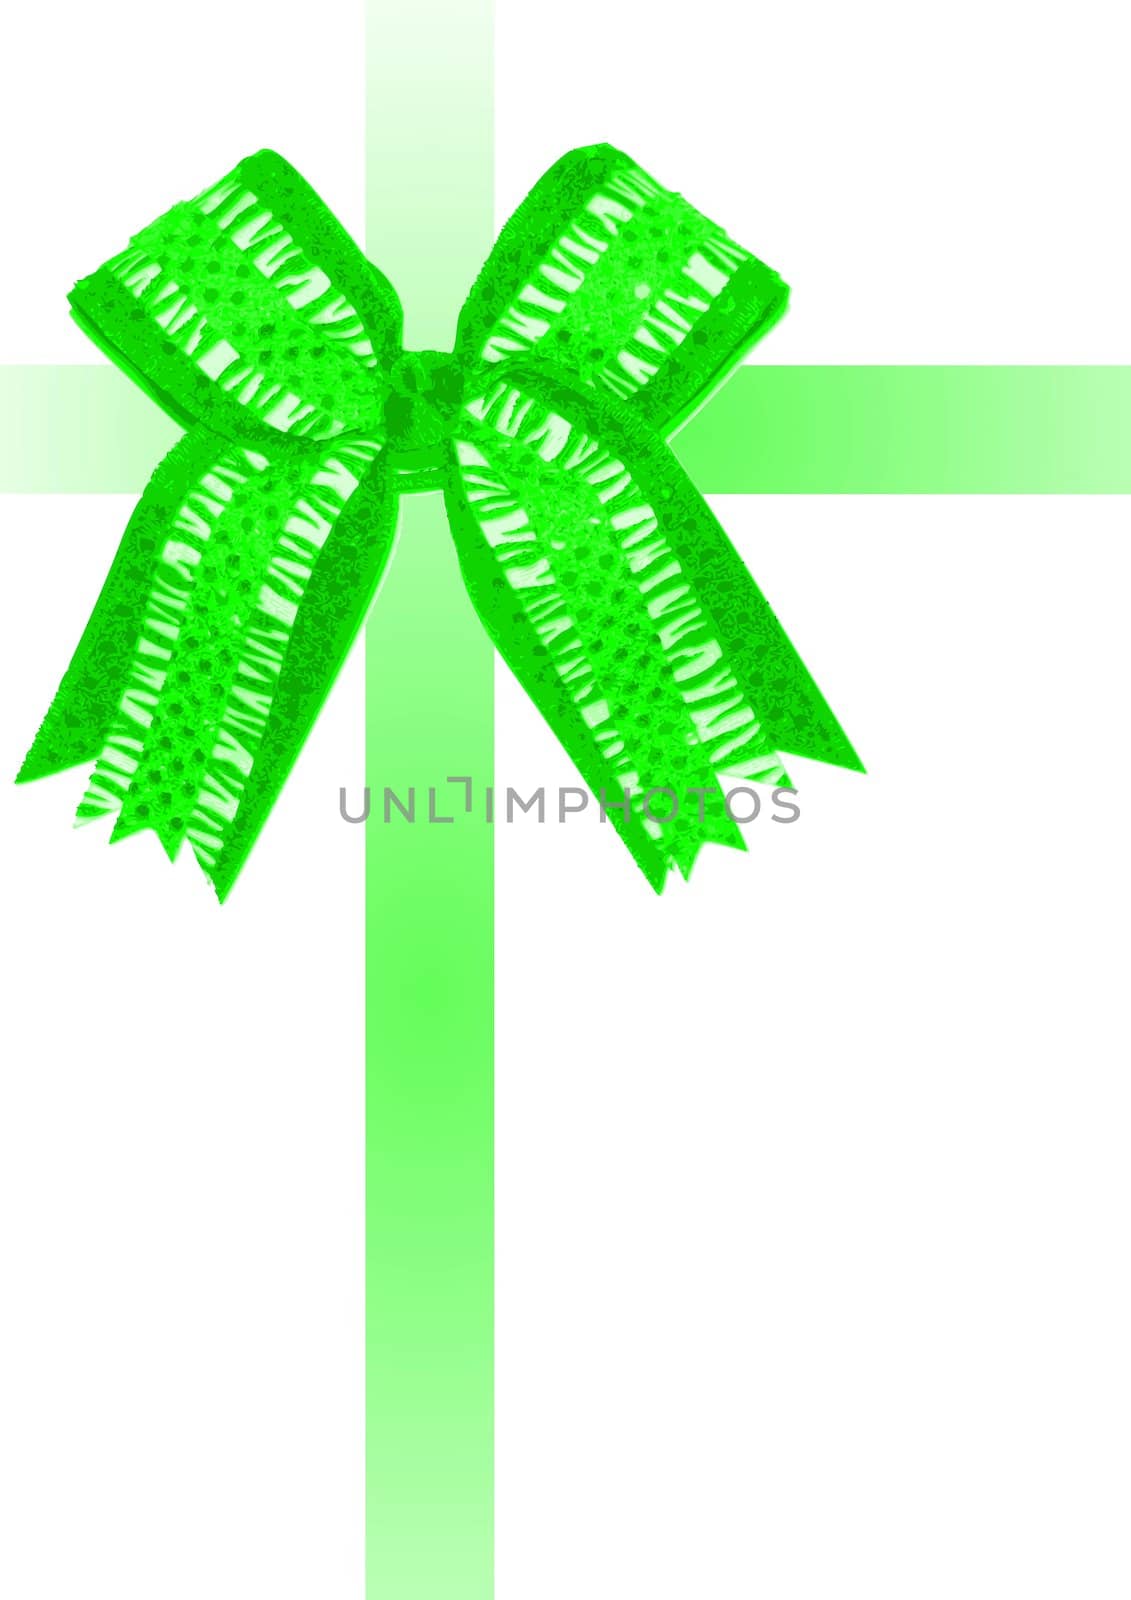 A green bow and ribbons wrapping the image as if it were a gift.